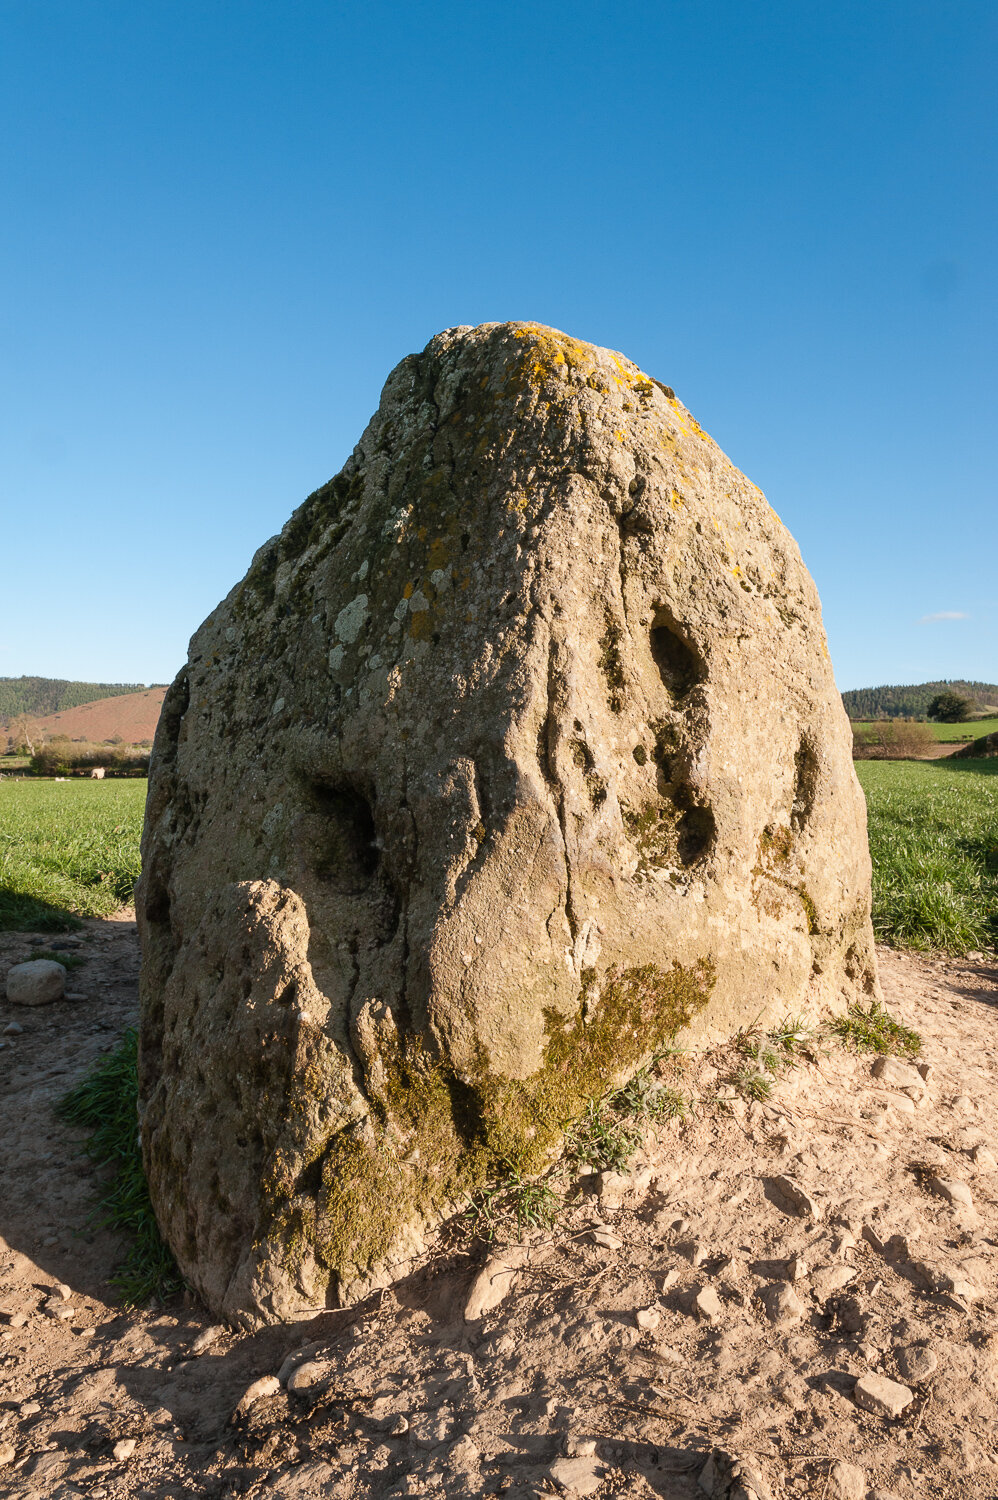 The Hoarstone, Knobley - it stands near the NE end of the Hindwell cursus